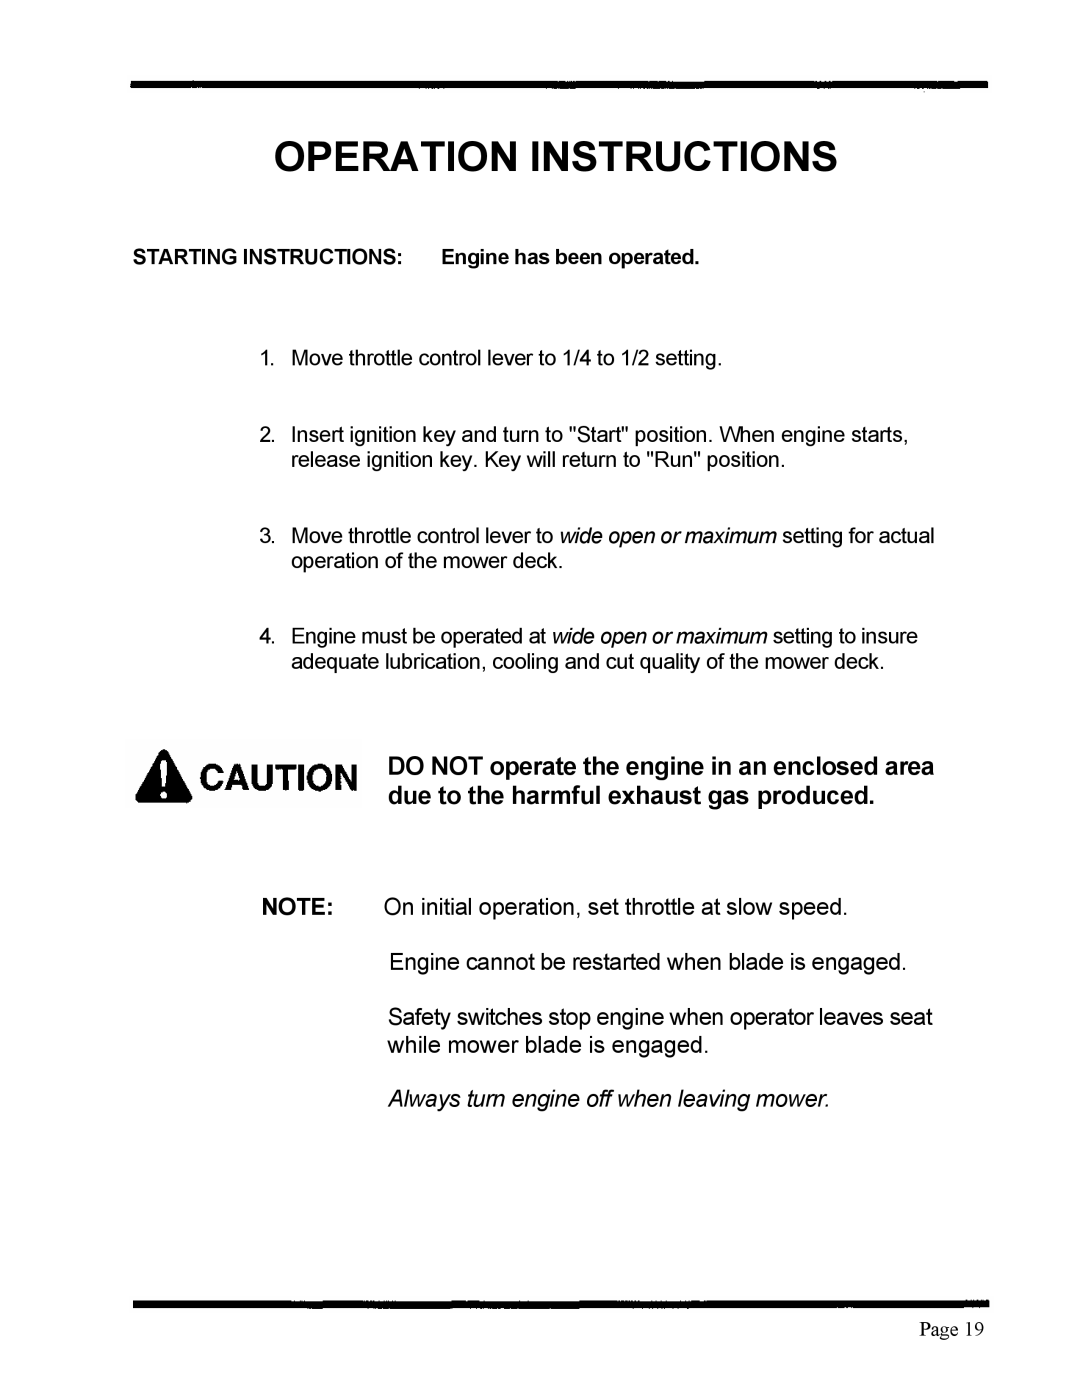 Dixon ZTR 5424, ZTR 5020 manual Operation Instructions, NOTE On initial operation, set throttle at slow speed 